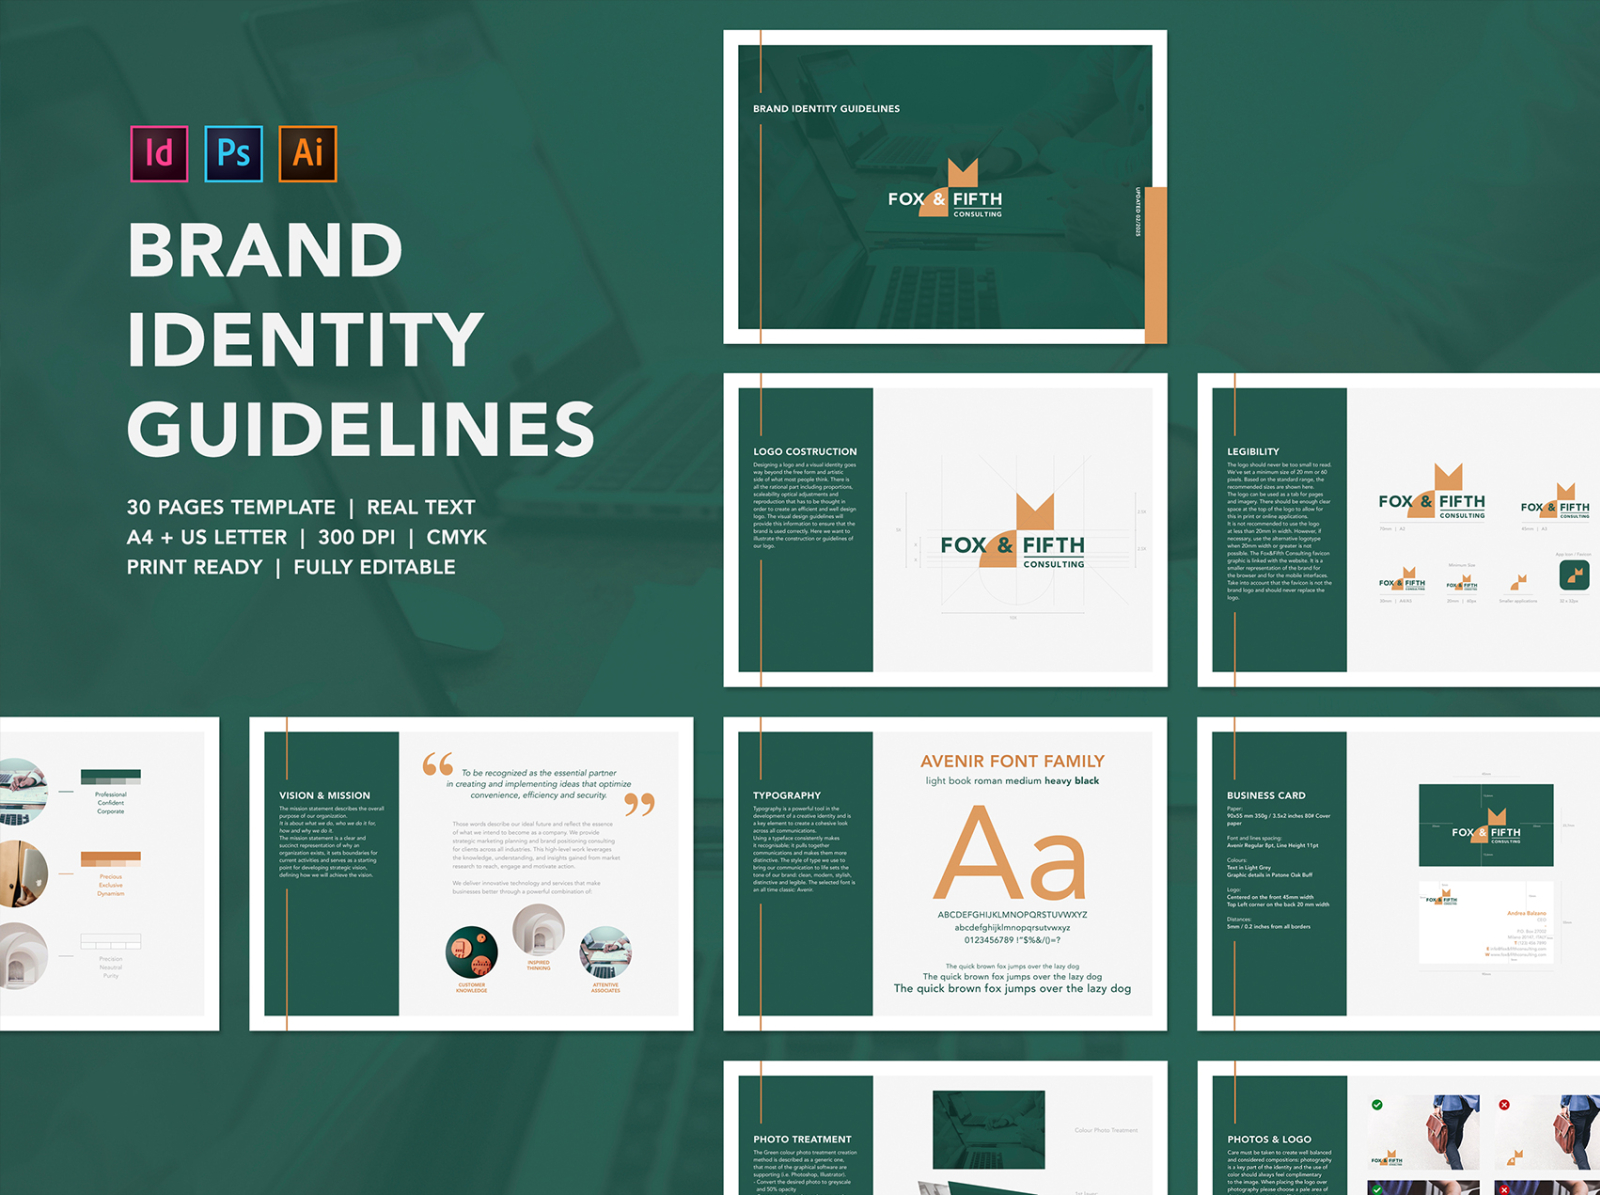 Brand Identity Guidelines Template by Andre28 on Dribbble